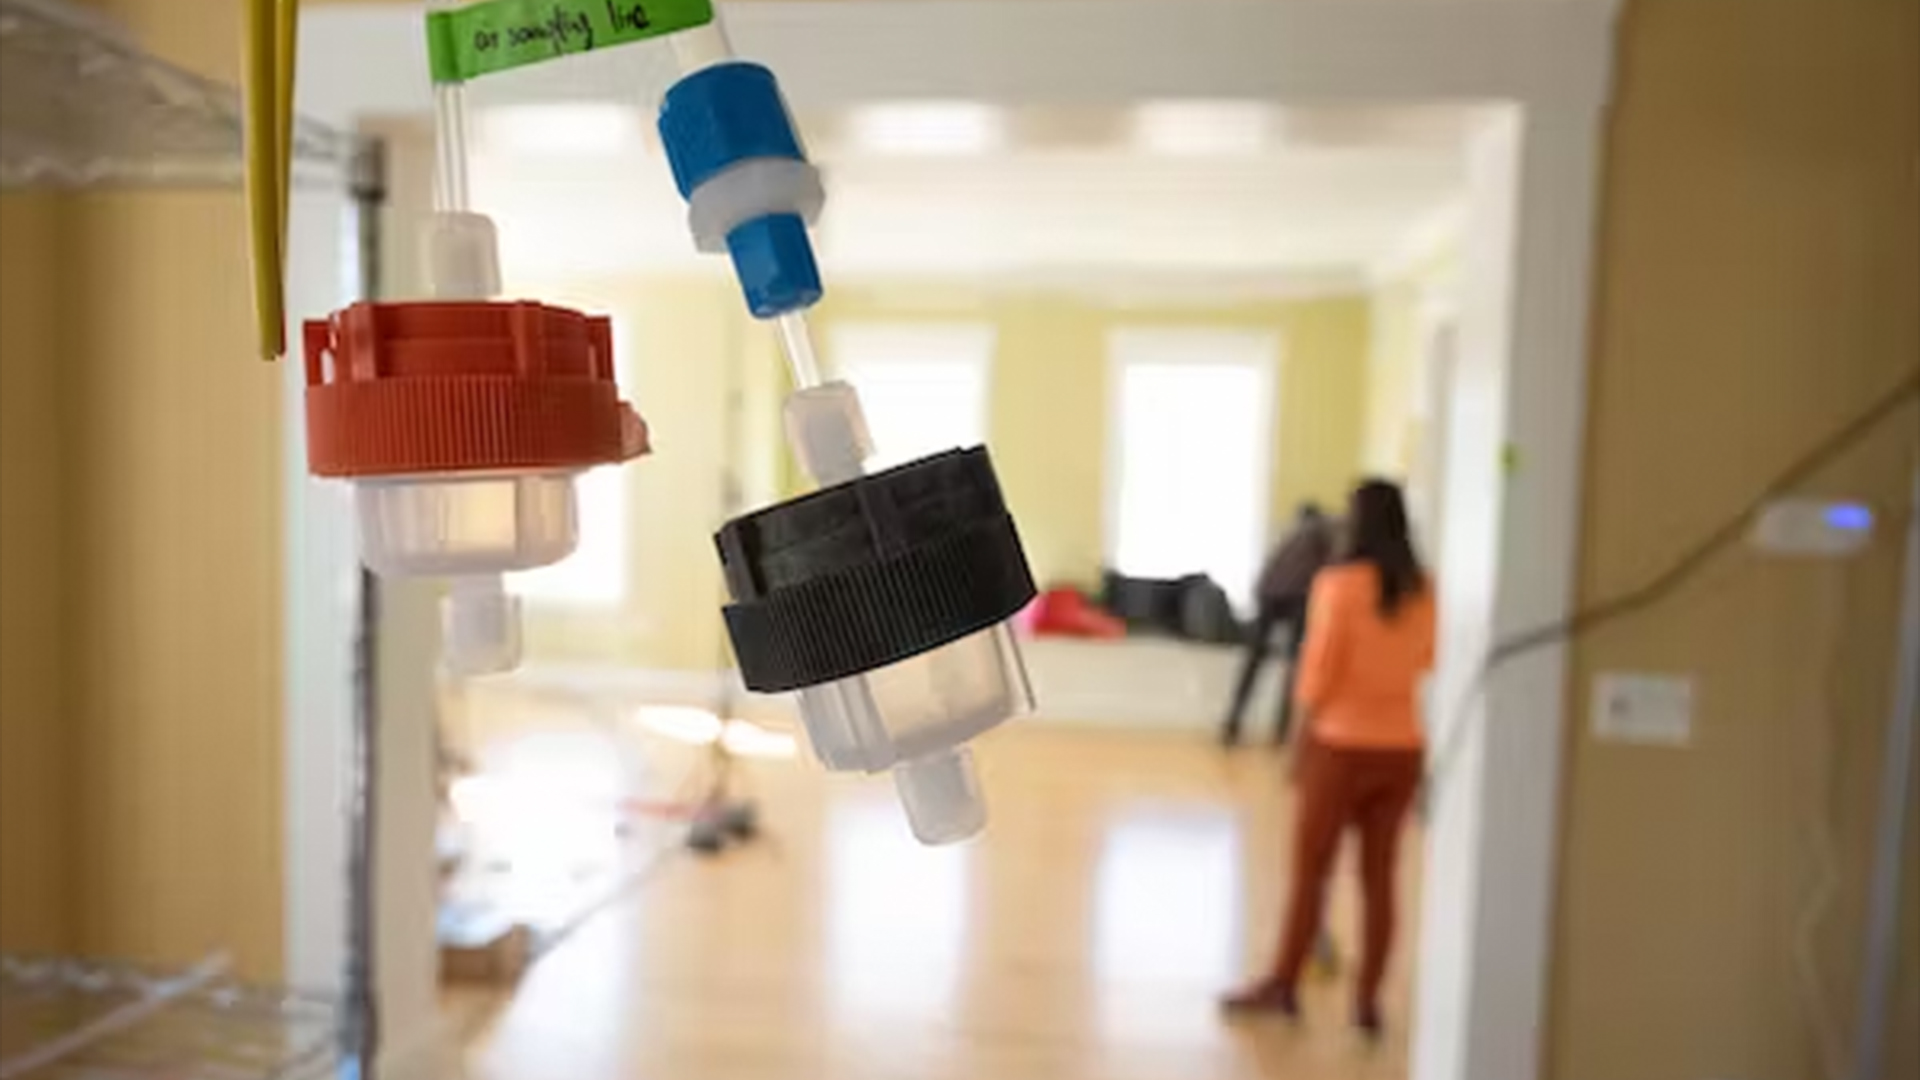 small plastic containers shown strung up throughout a house, with researchers in the background